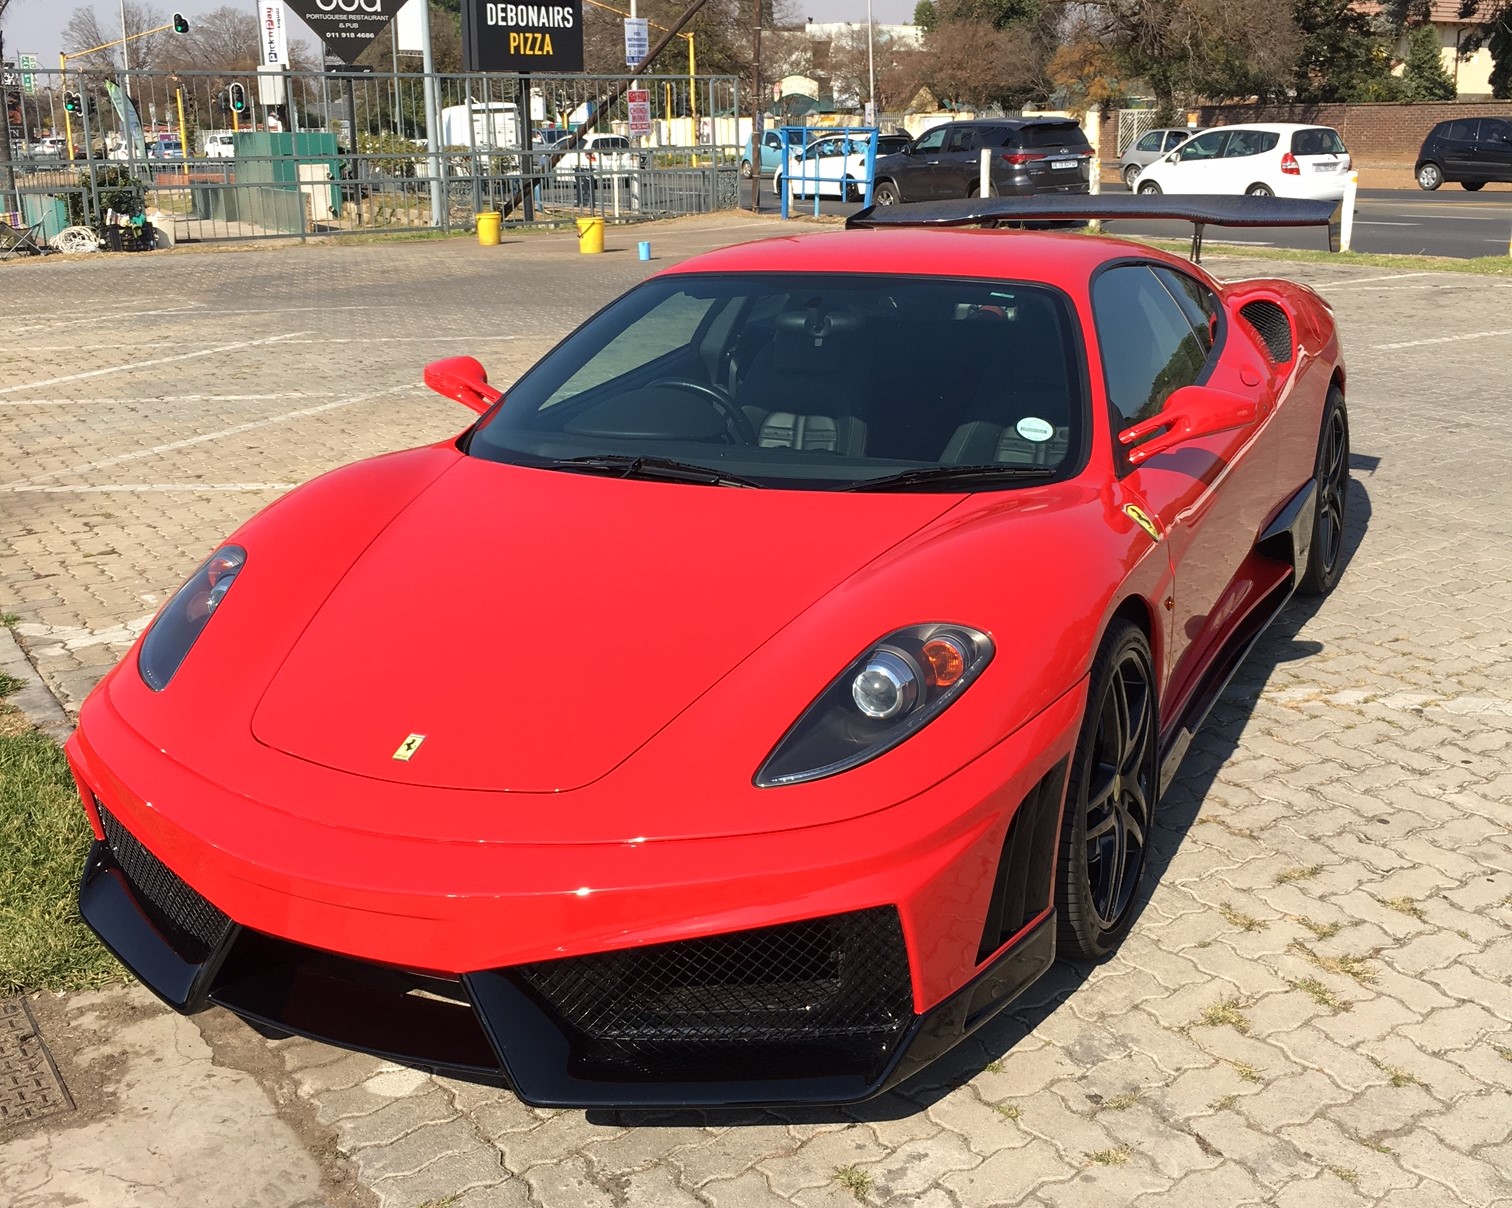 Ferrari F430 With Super Veloce Racing Kit In South Africa